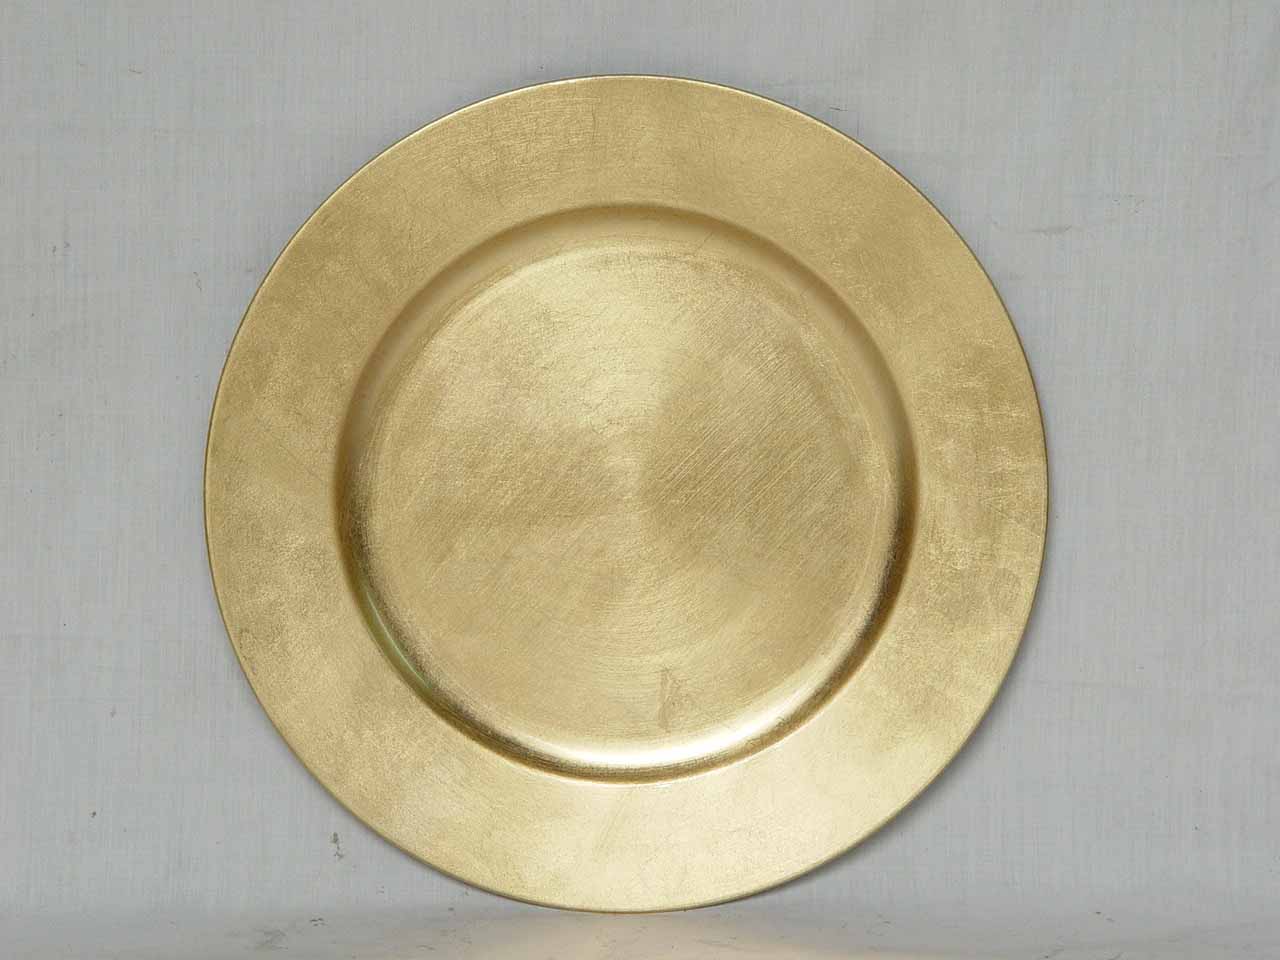 plasitc charger plate